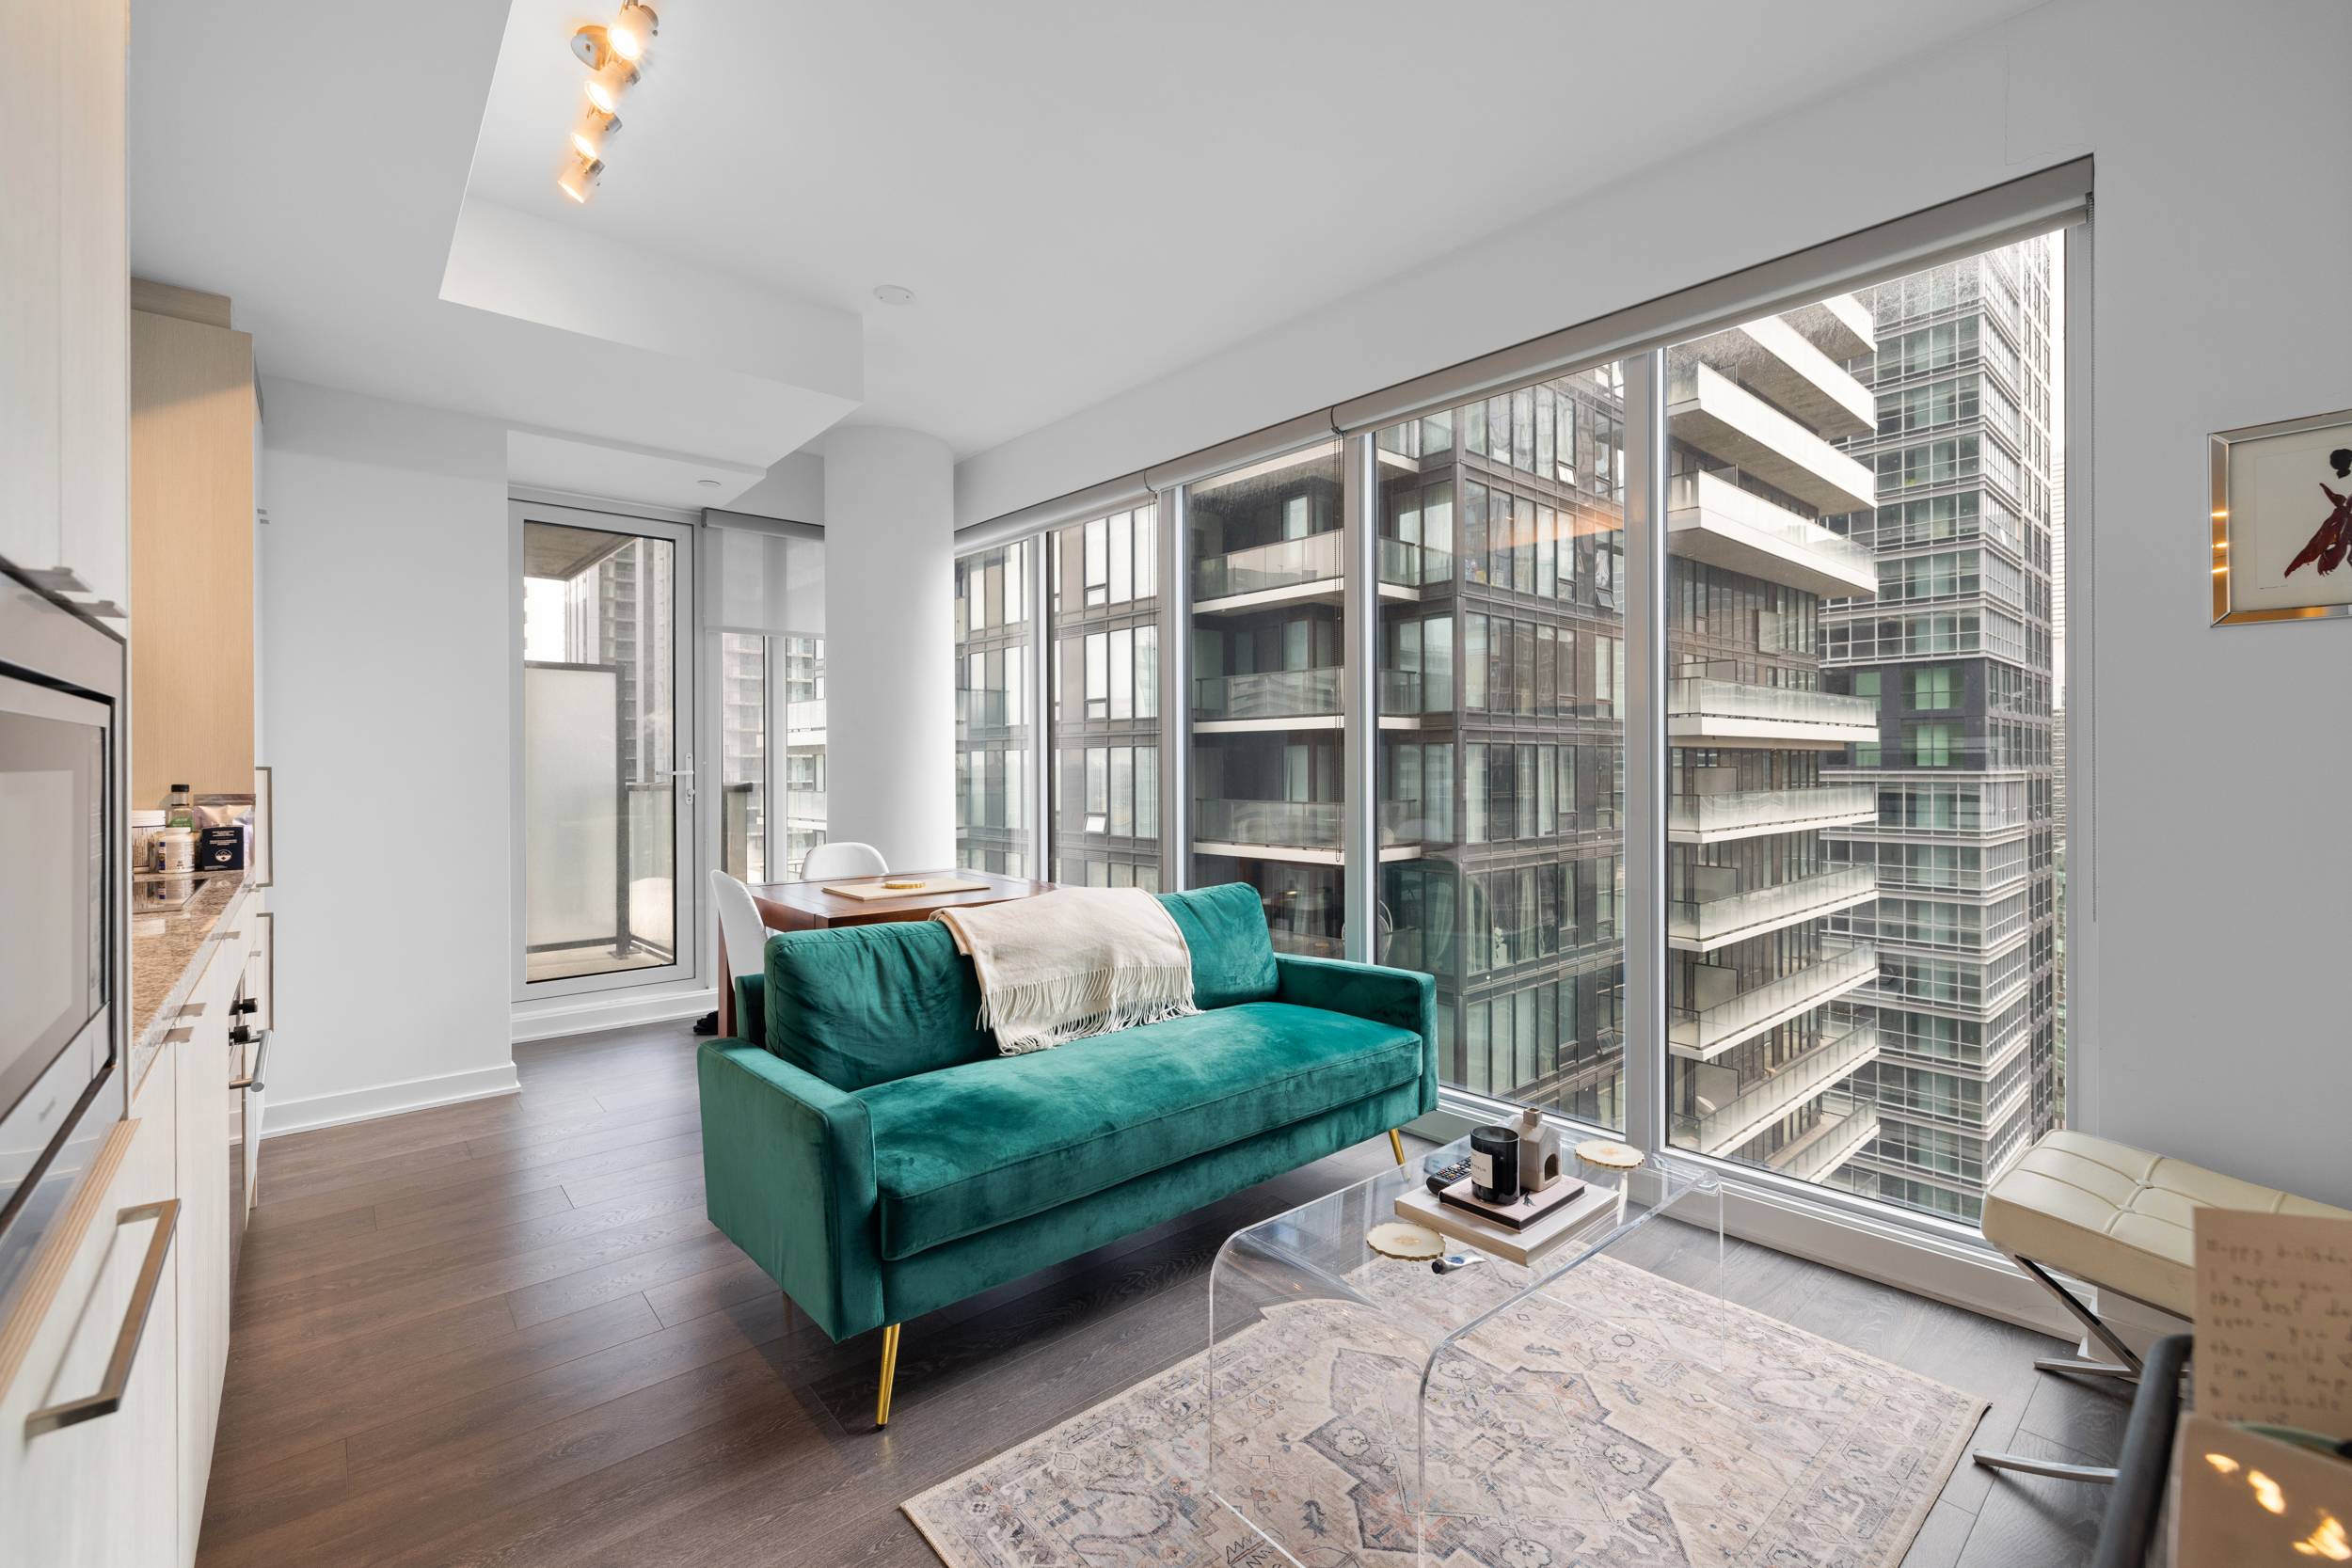 LUXURY CONDO FOR RENT IN CENTRAL KING WEST